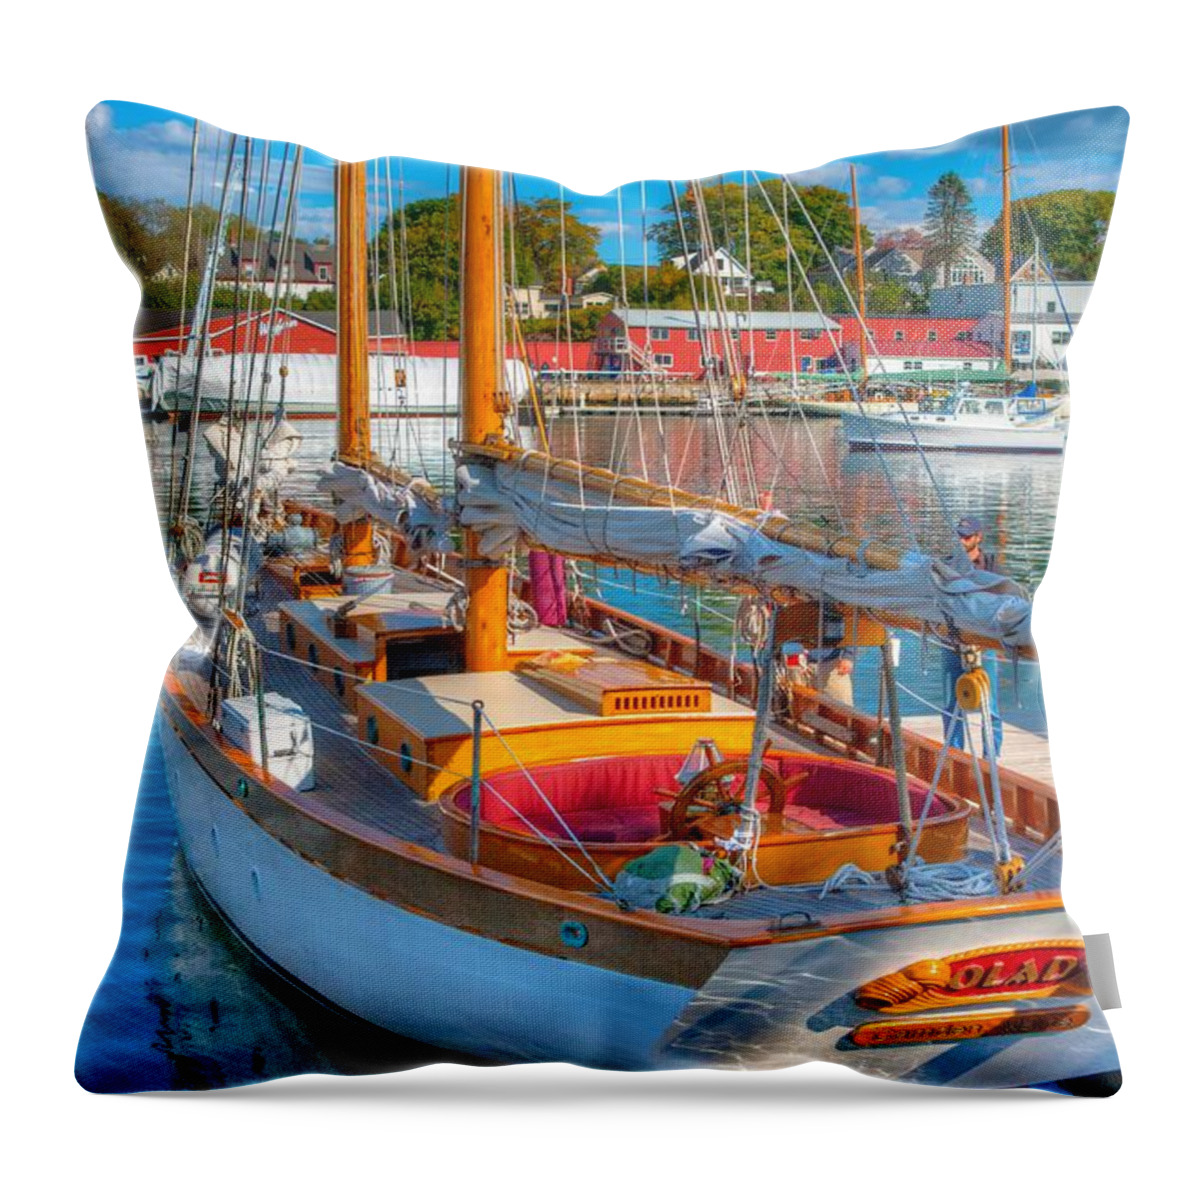 Seascape Throw Pillow featuring the photograph Olad by Steve Brown